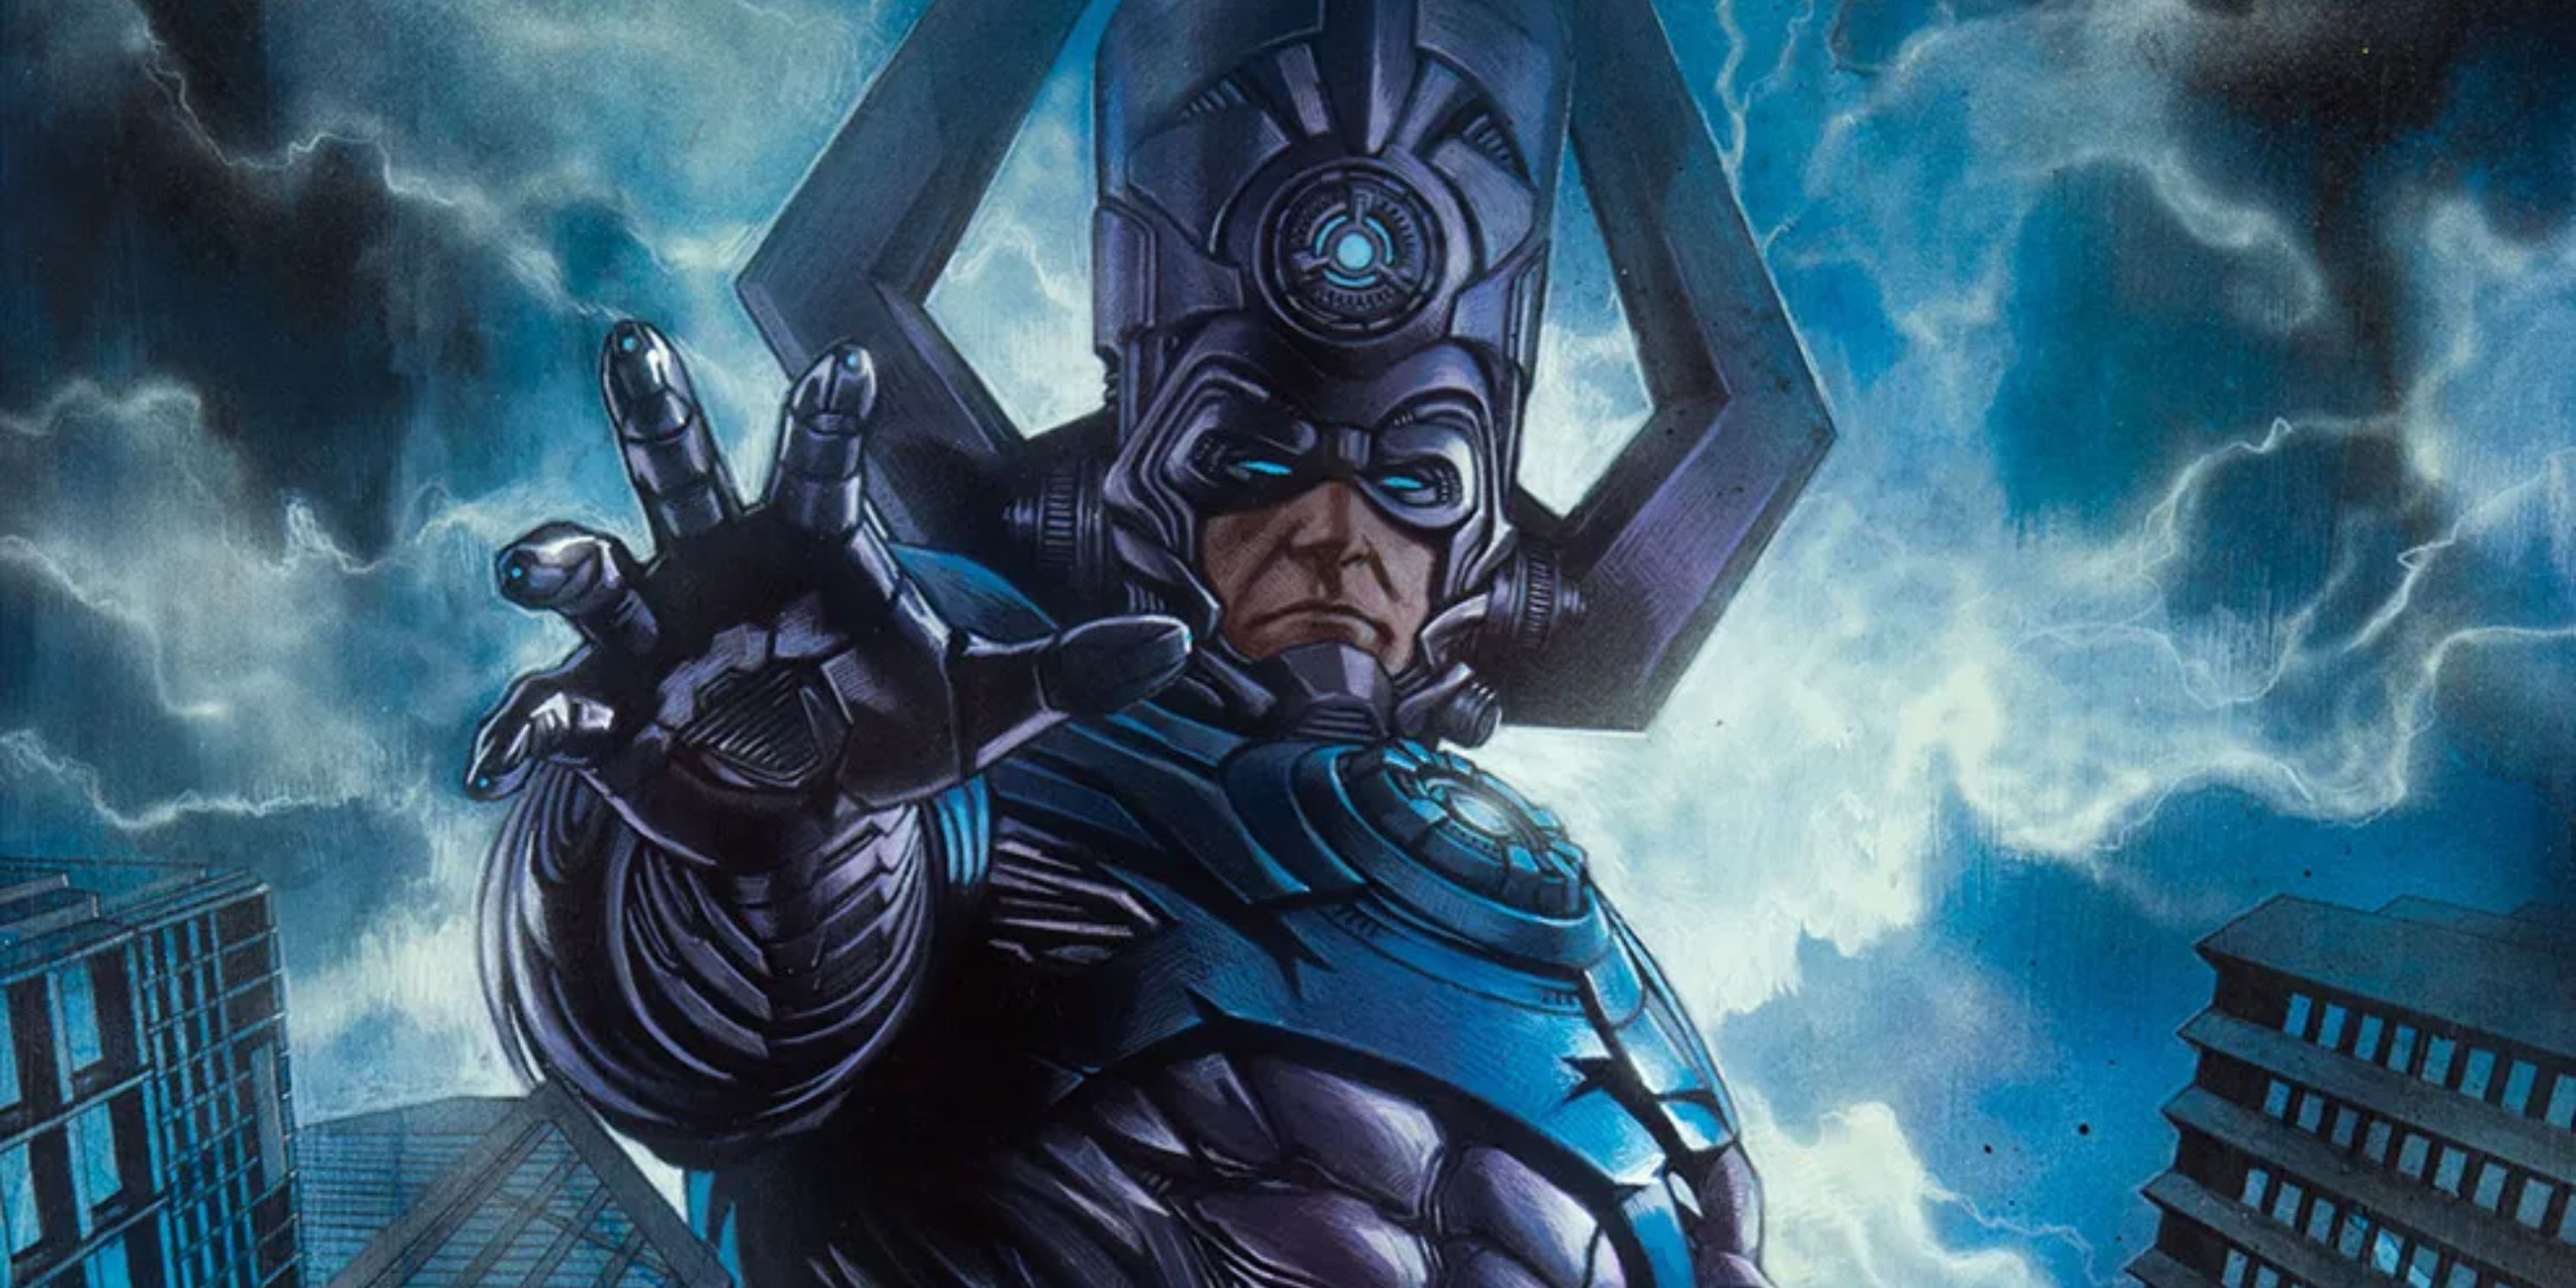 Galactus on Earth with a storm brewing